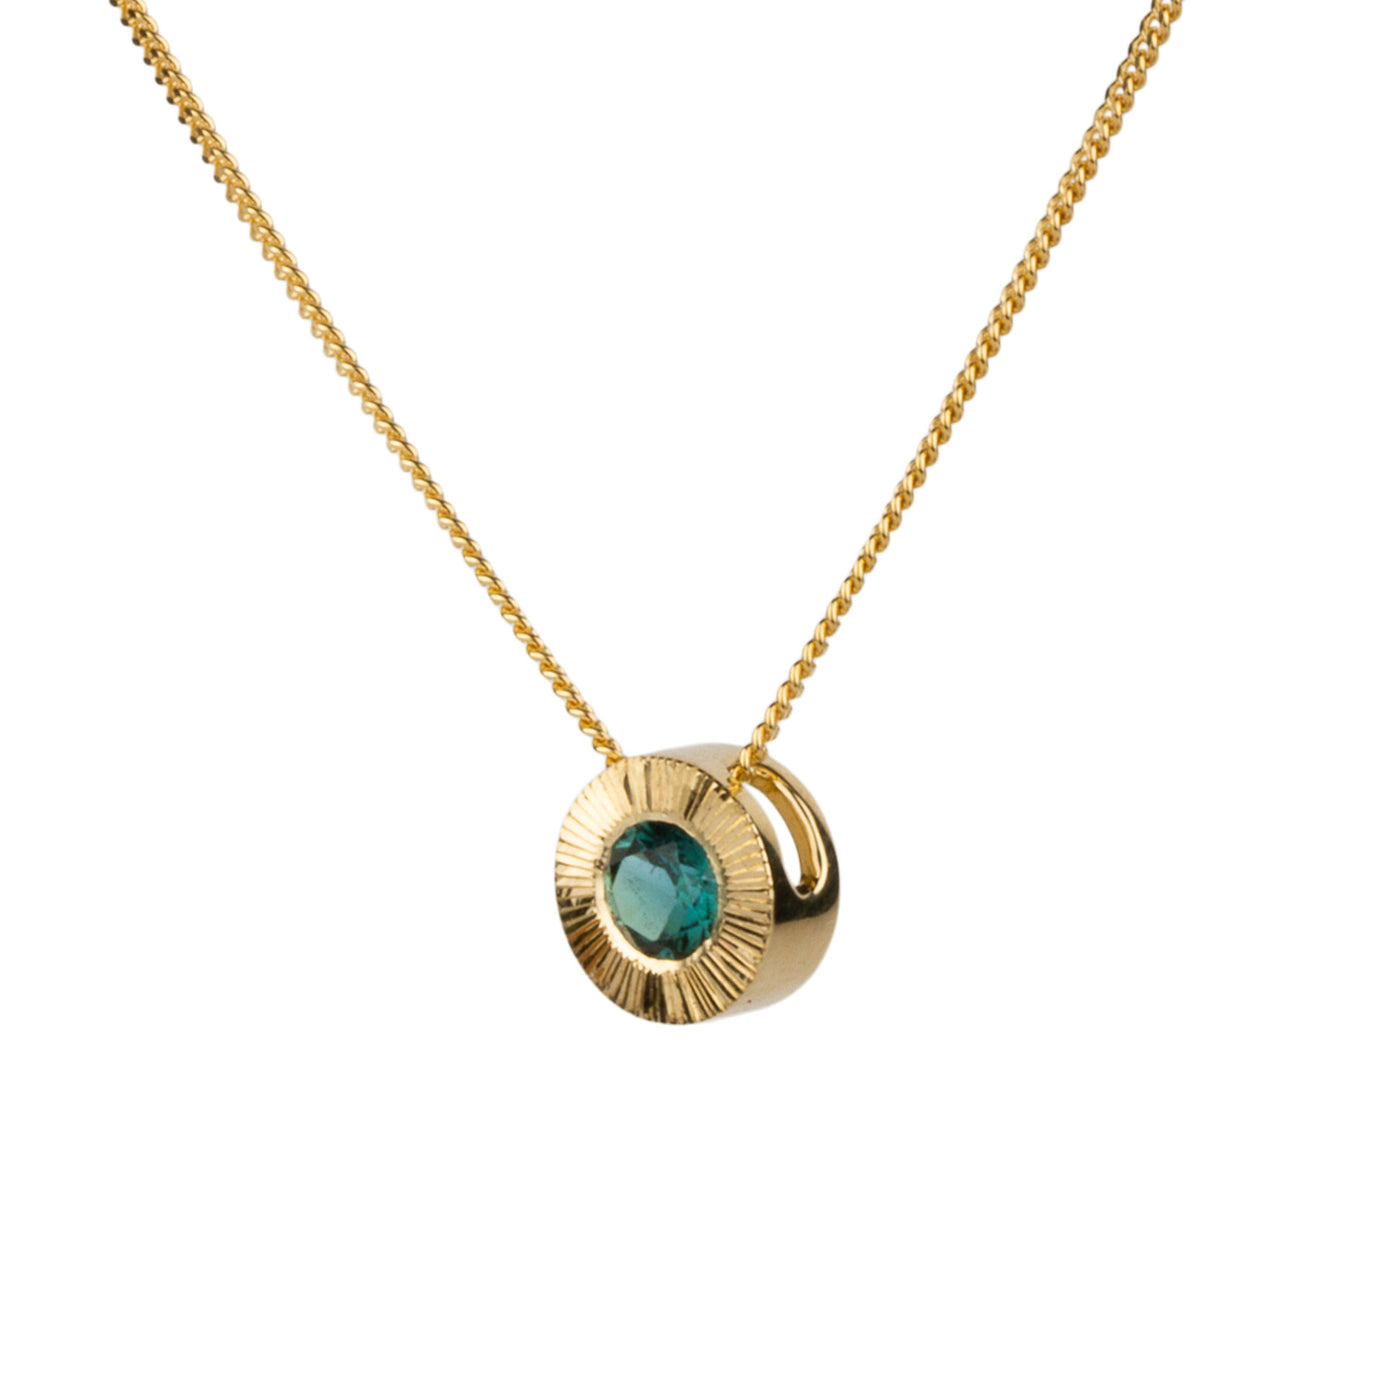 Side view 14k yellow gold medium Aurora necklace with a round teal green indicolite tourmaline center and engraved rays halo border on a white background